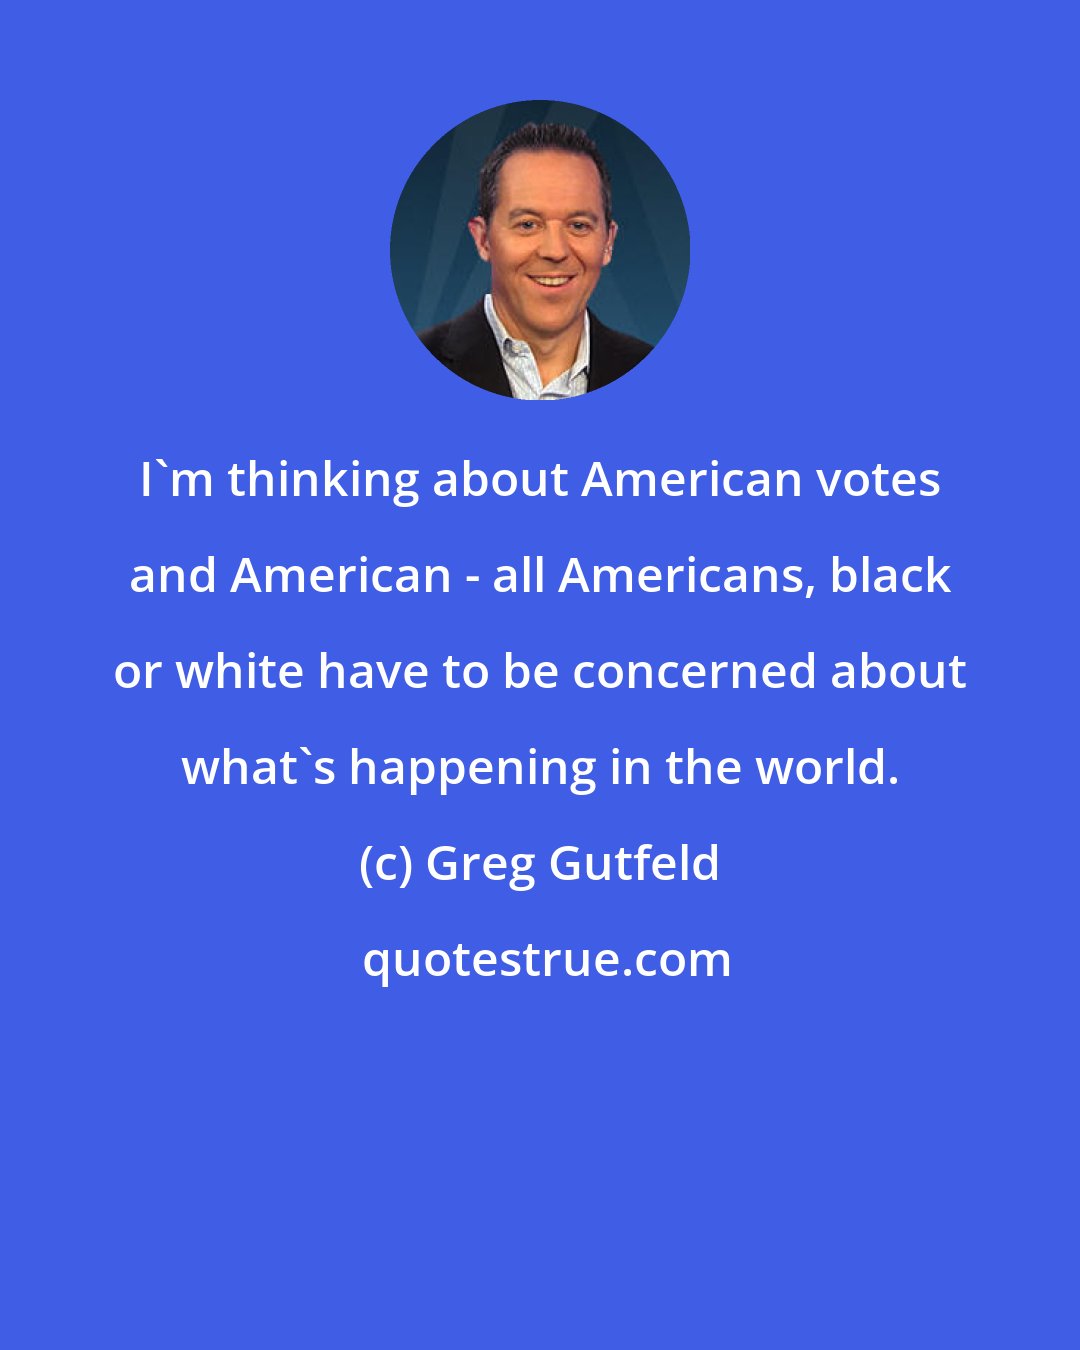 Greg Gutfeld: I'm thinking about American votes and American - all Americans, black or white have to be concerned about what's happening in the world.